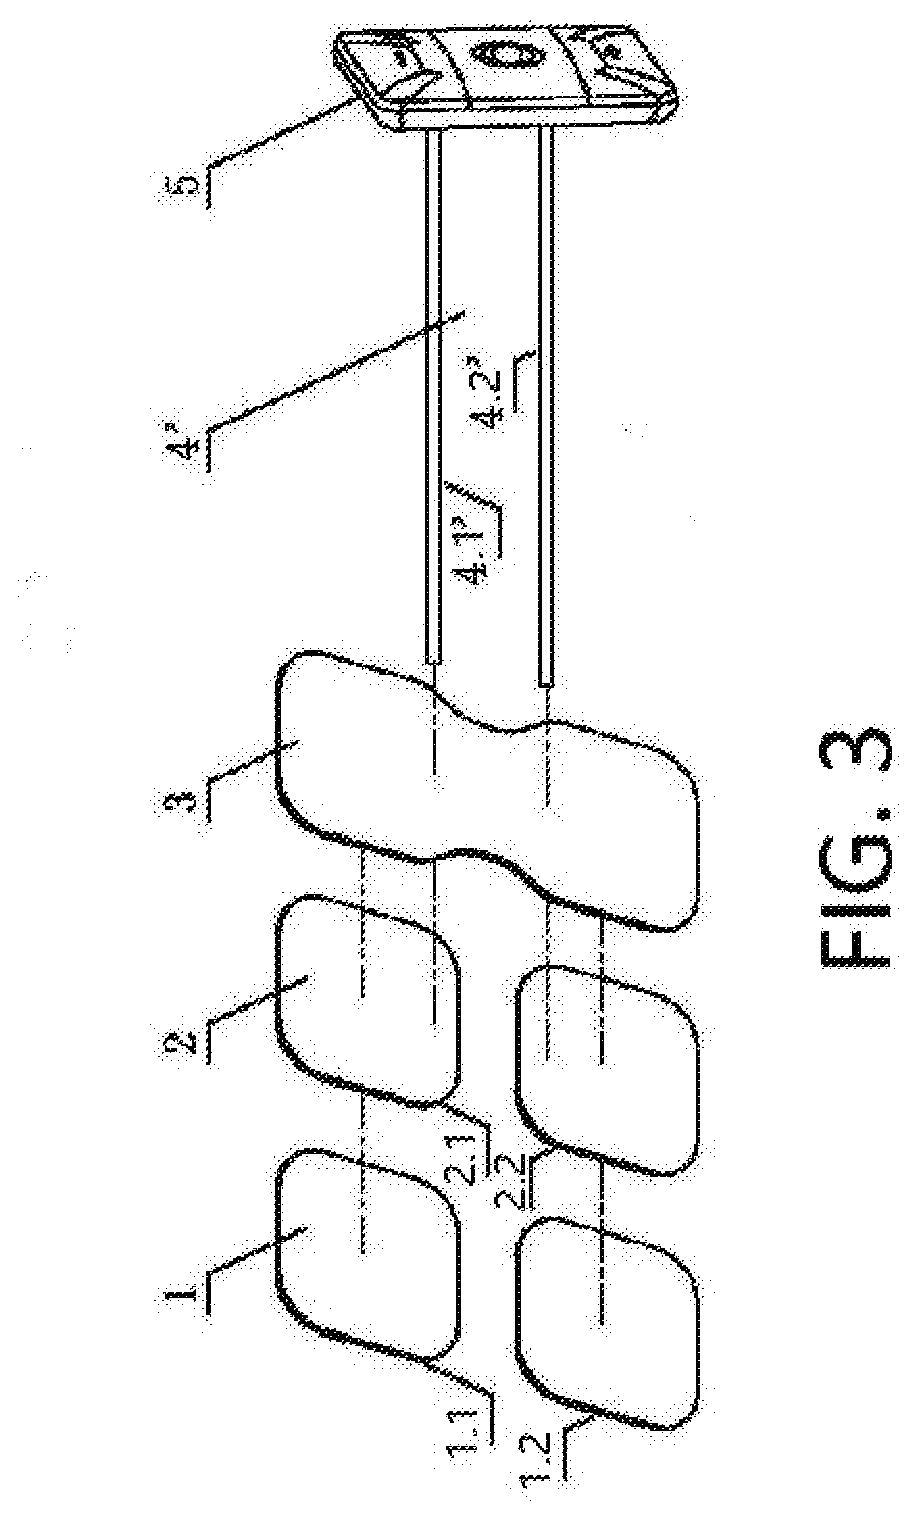 Electrotherapy apparatus, system and method for enhanced drug delivery